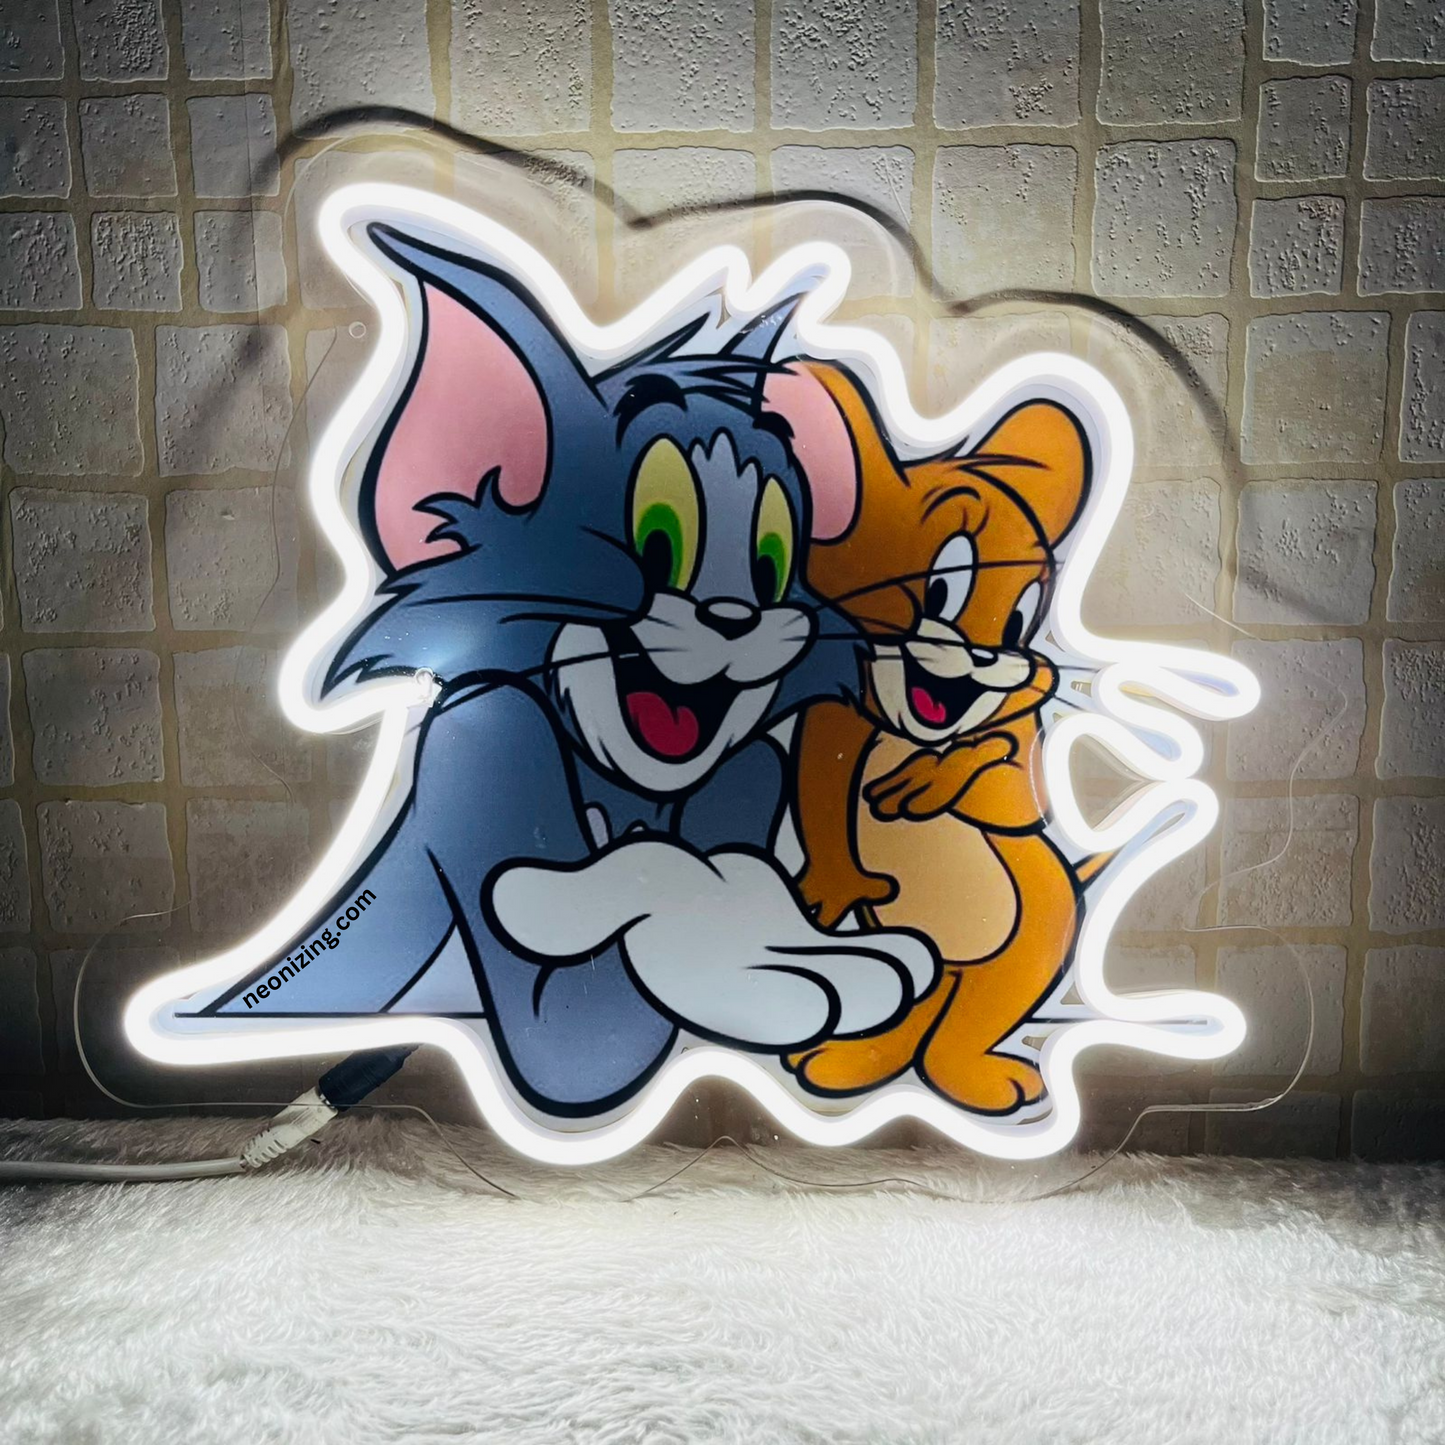 Tom and Jerry Neon Artwork - Relive Childhood Joy with Tom and Jerry Magic